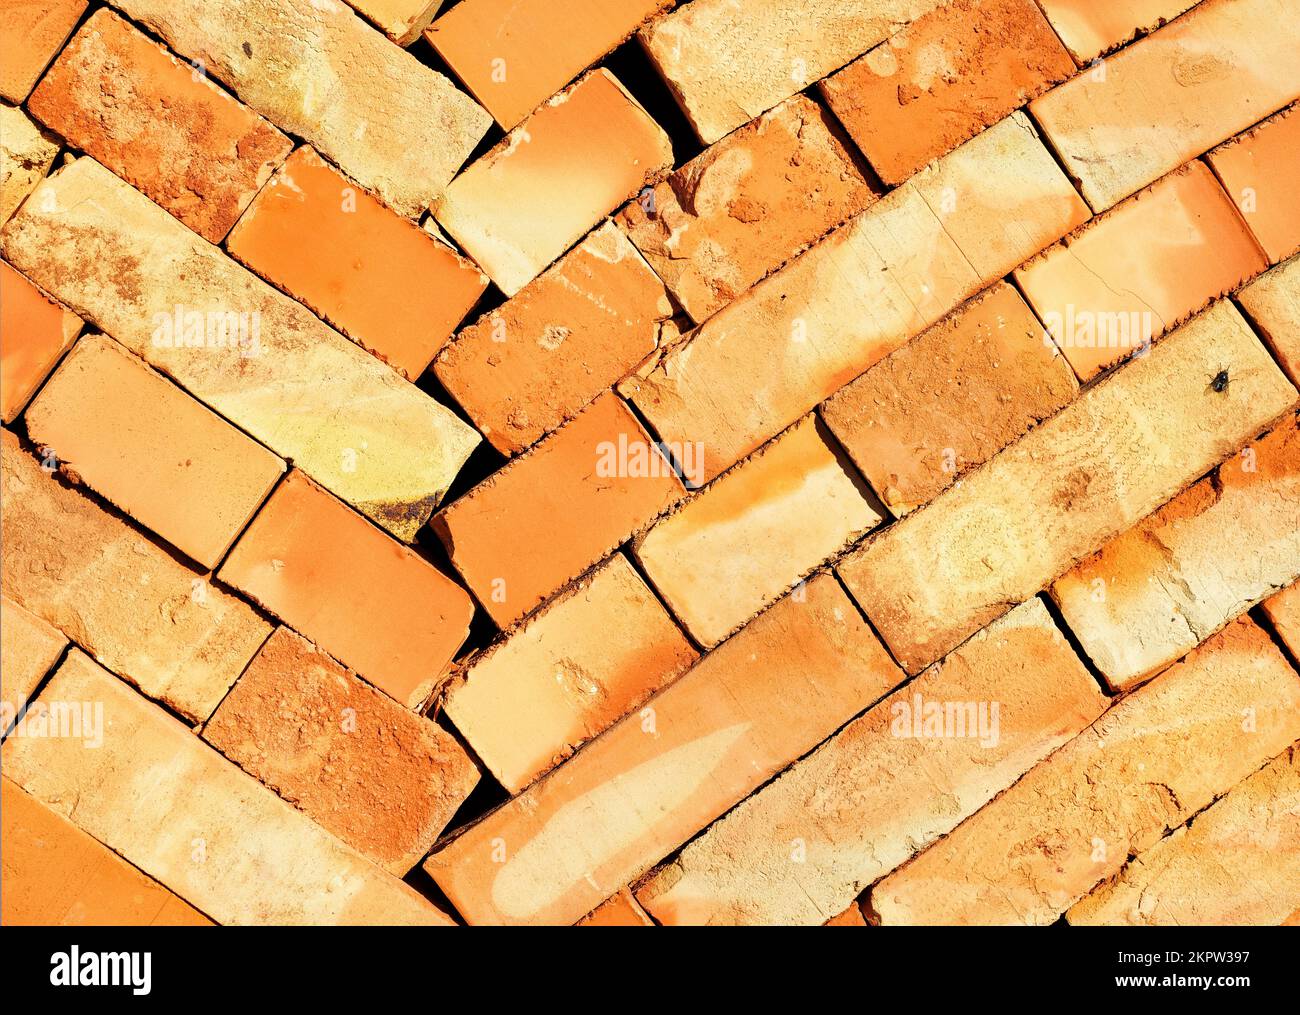 The orange brick is stacked in even oblique rows. Texture of a brick close-up in sunlight. Stock Photo